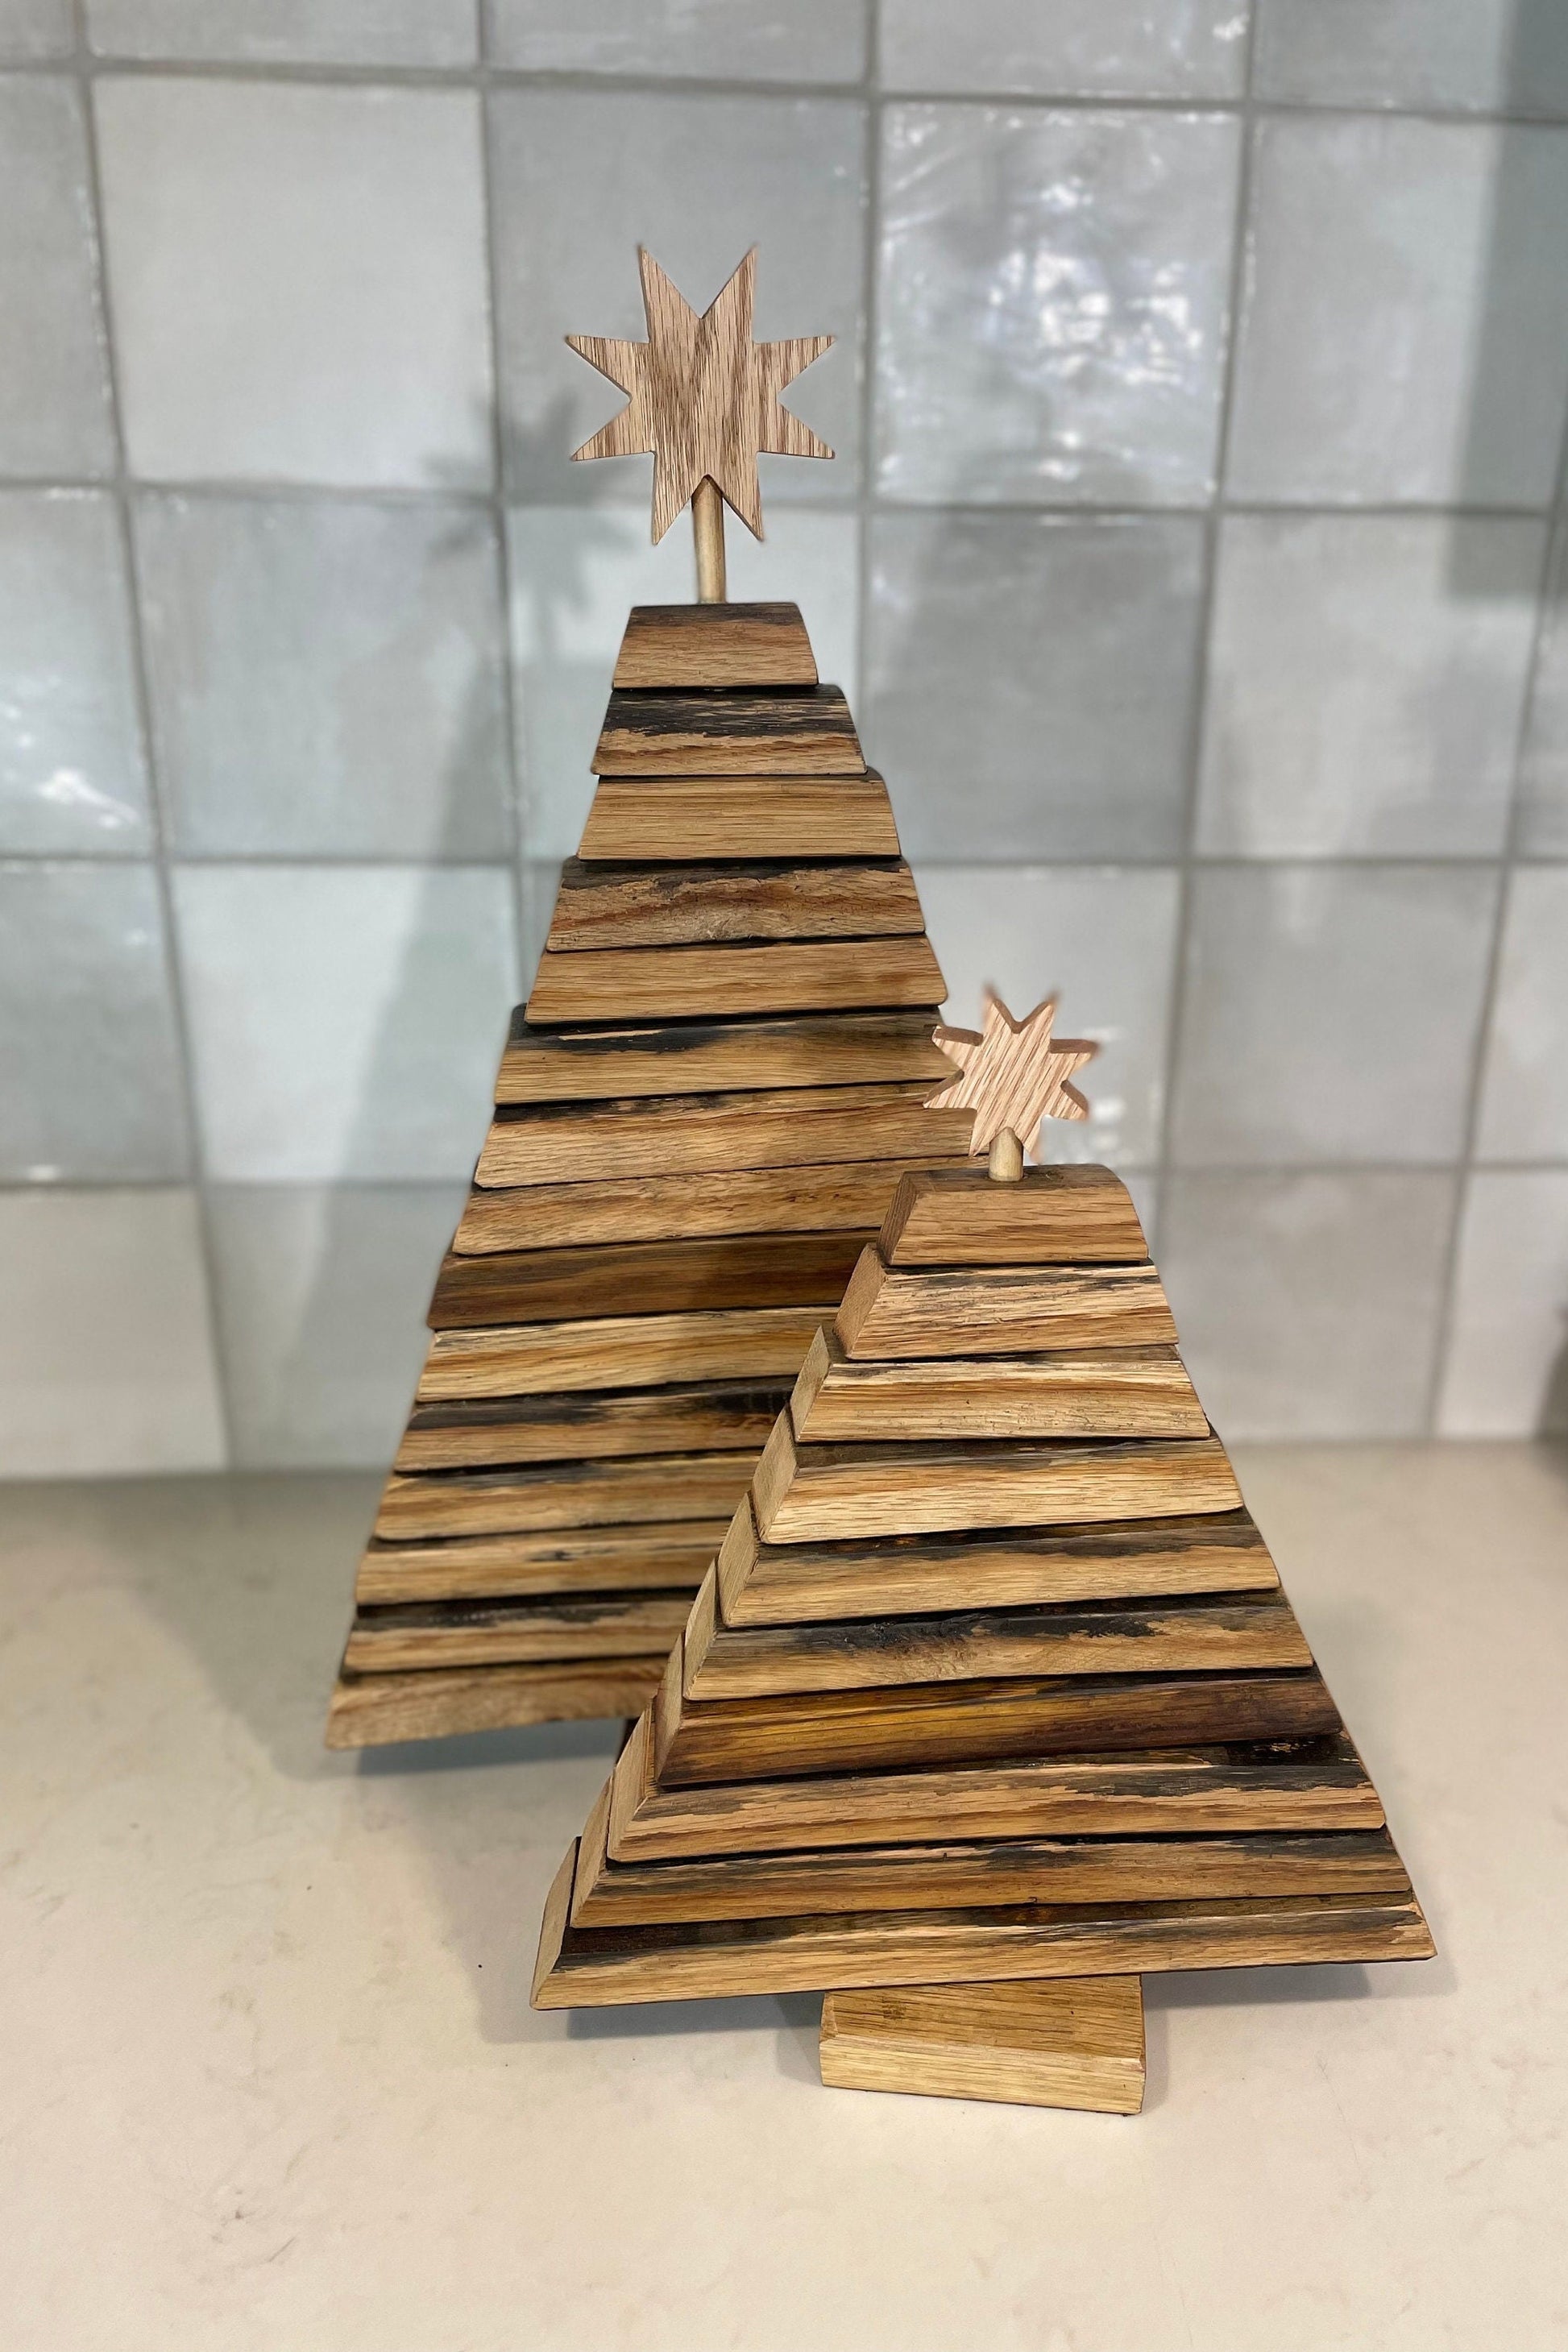 Bourbon Barrel Christmas Trees- Two sizes available